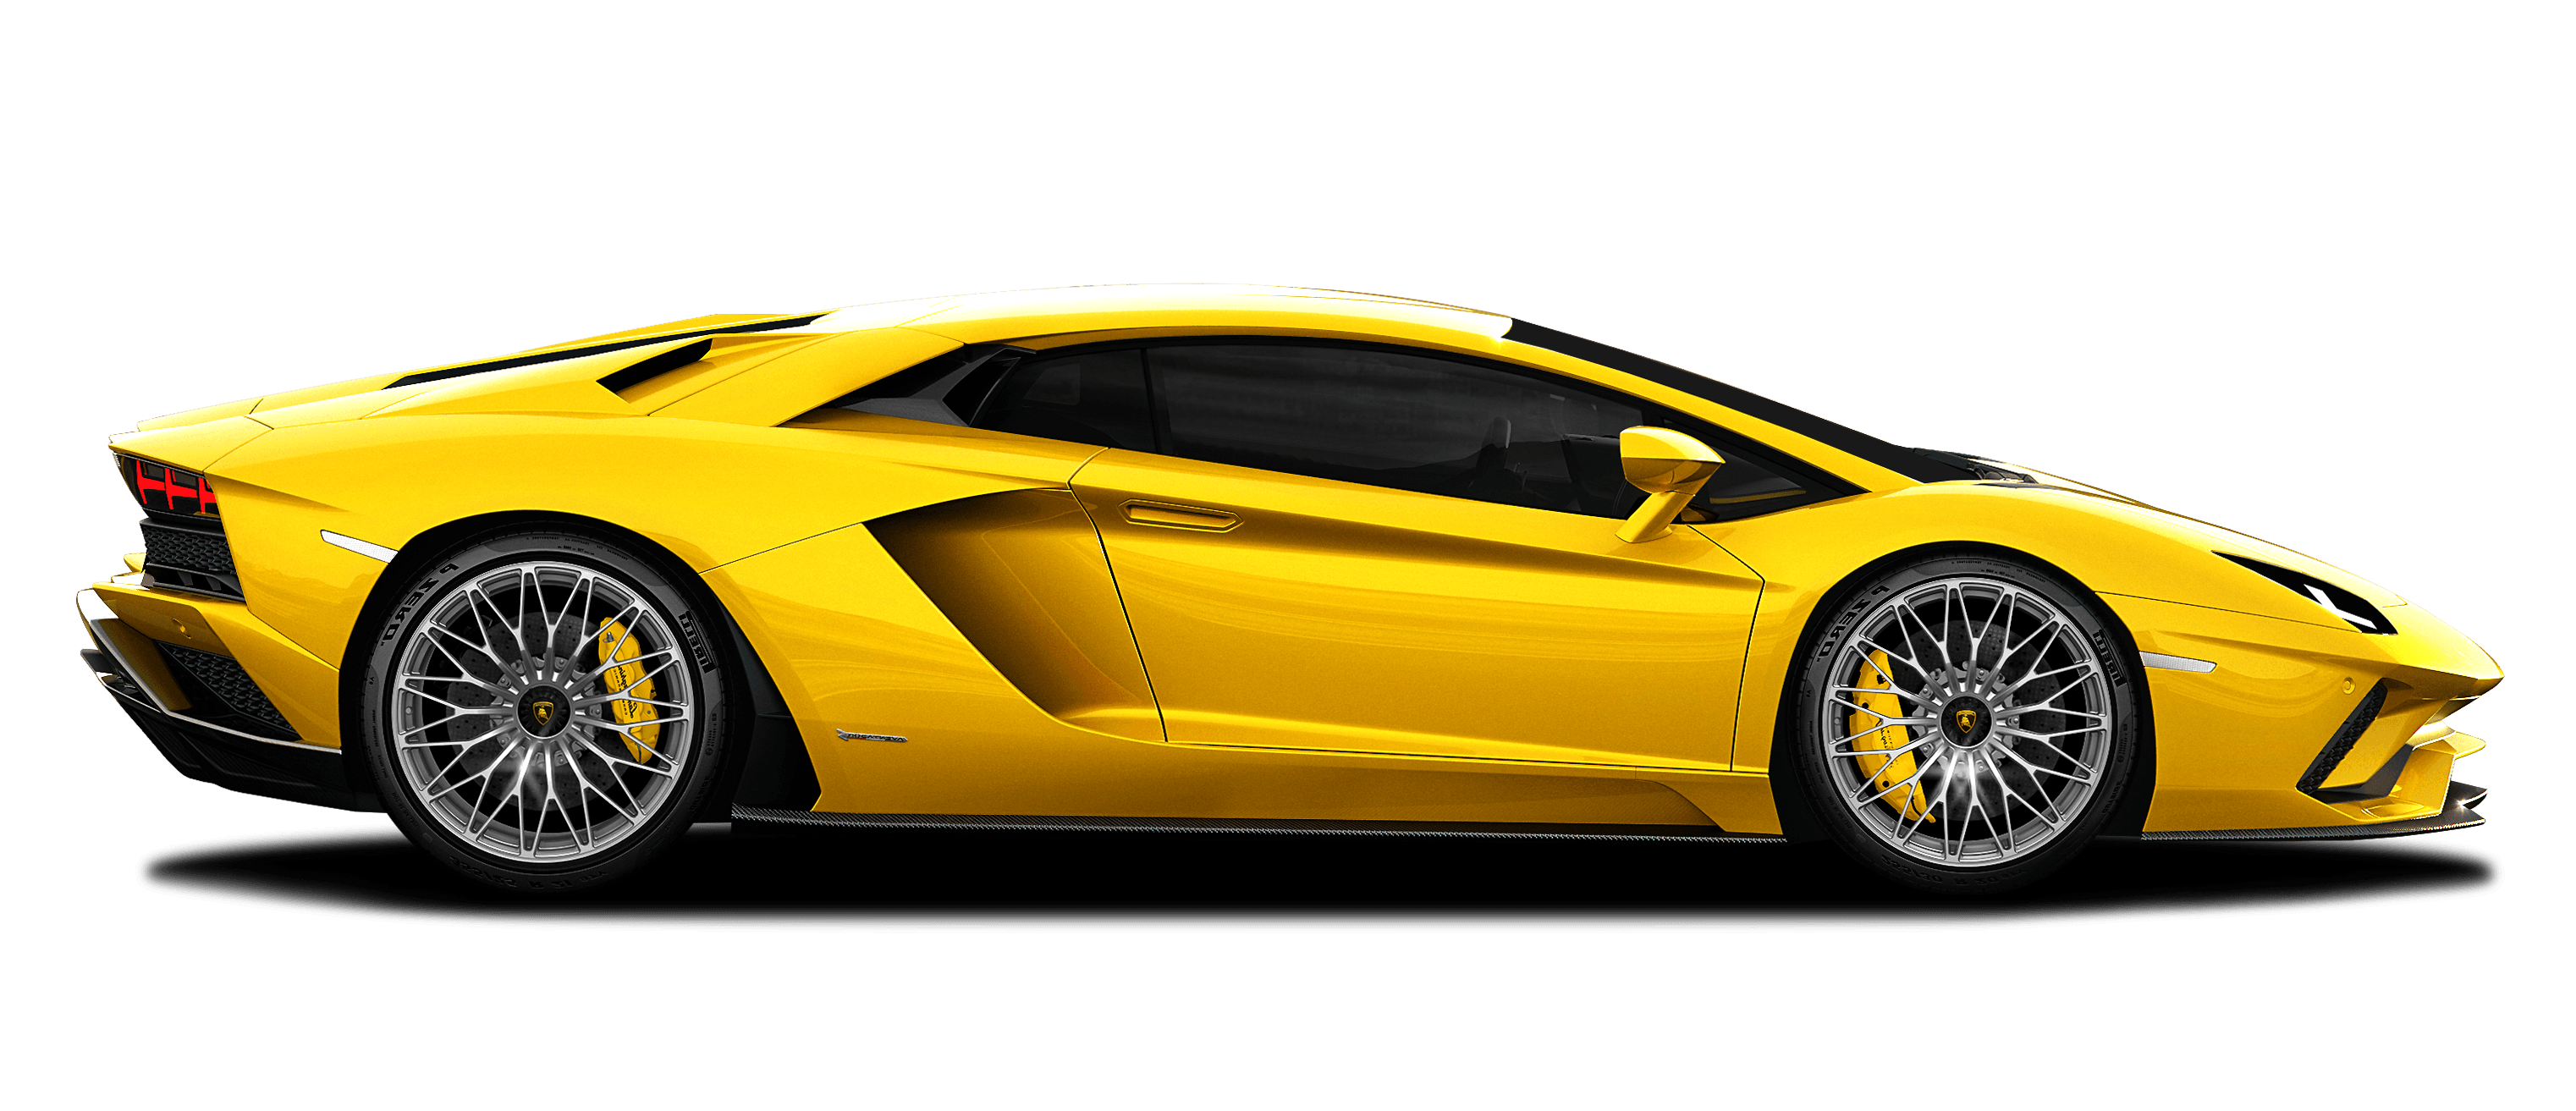 Collection of Lambo clipart | Free download best Lambo ...